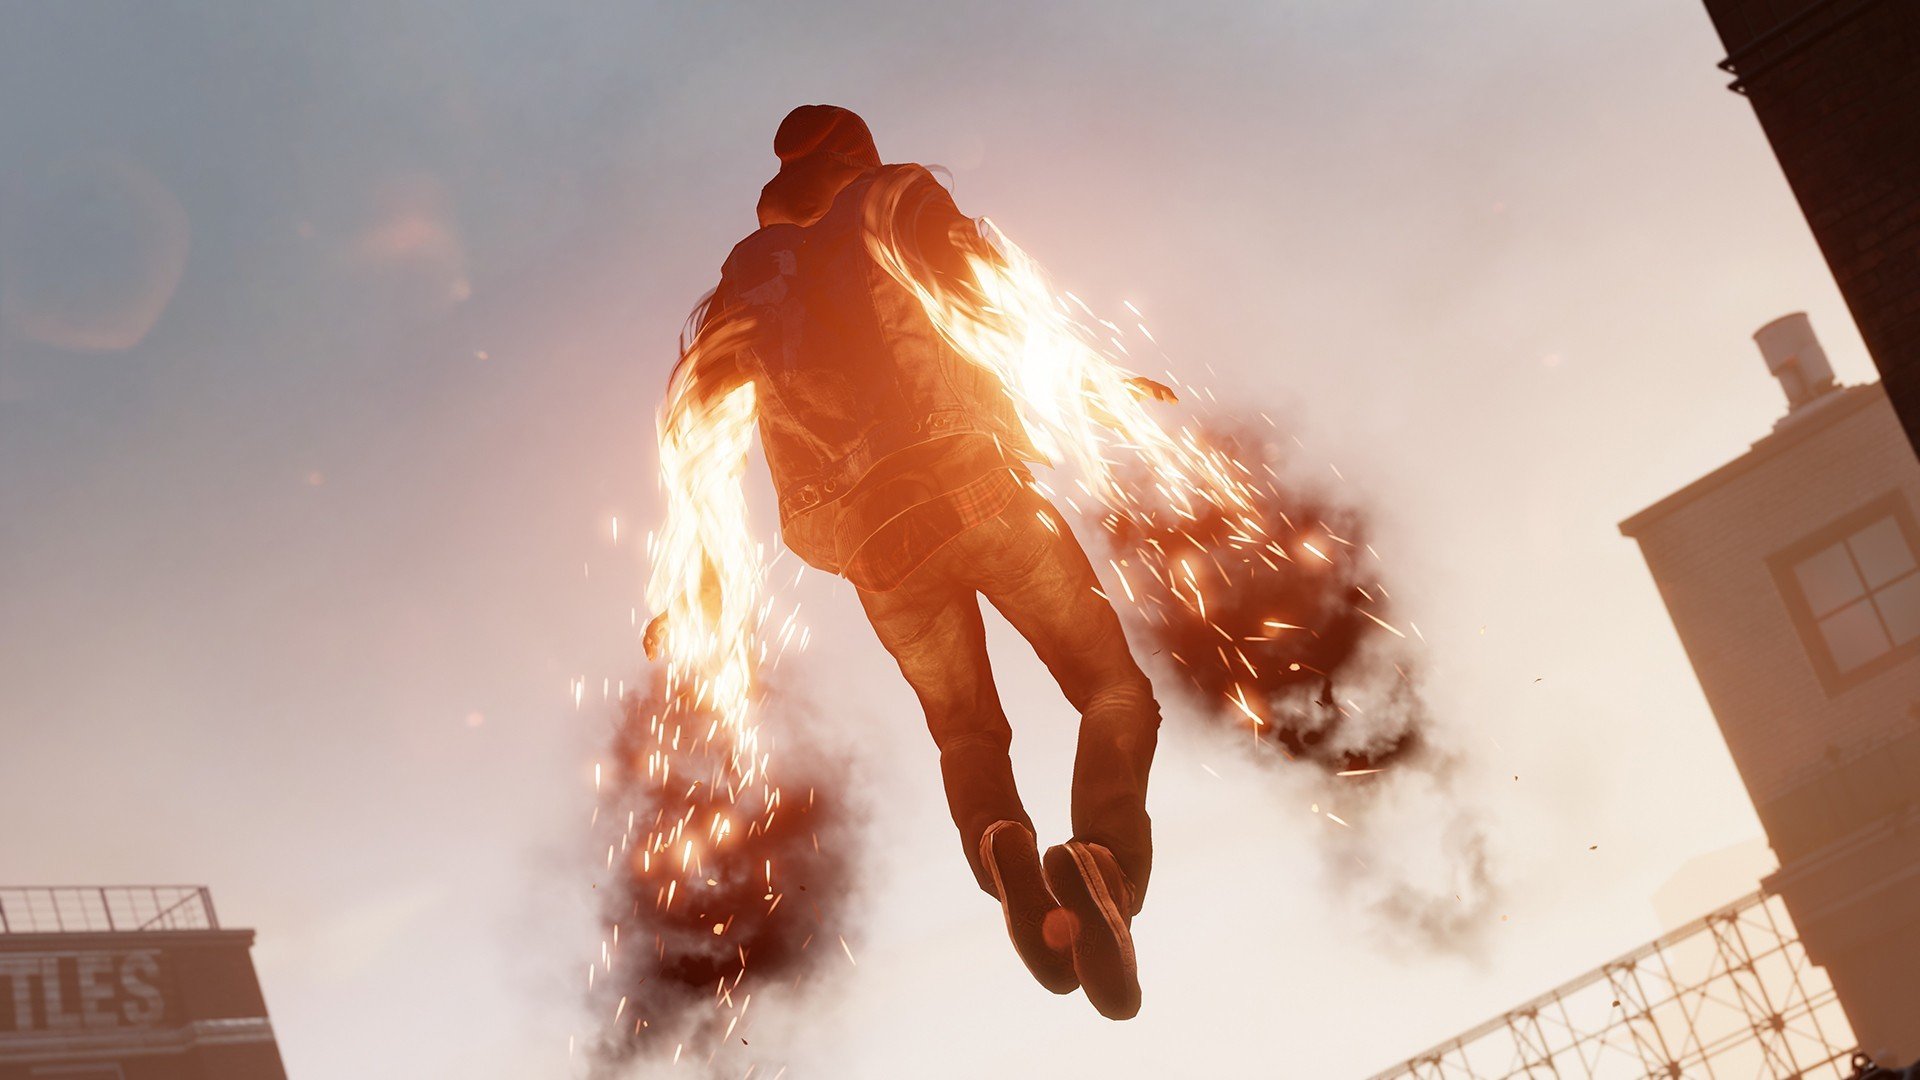 Pc gaming infamous second son hd wallpapers desktop and mobile images photos